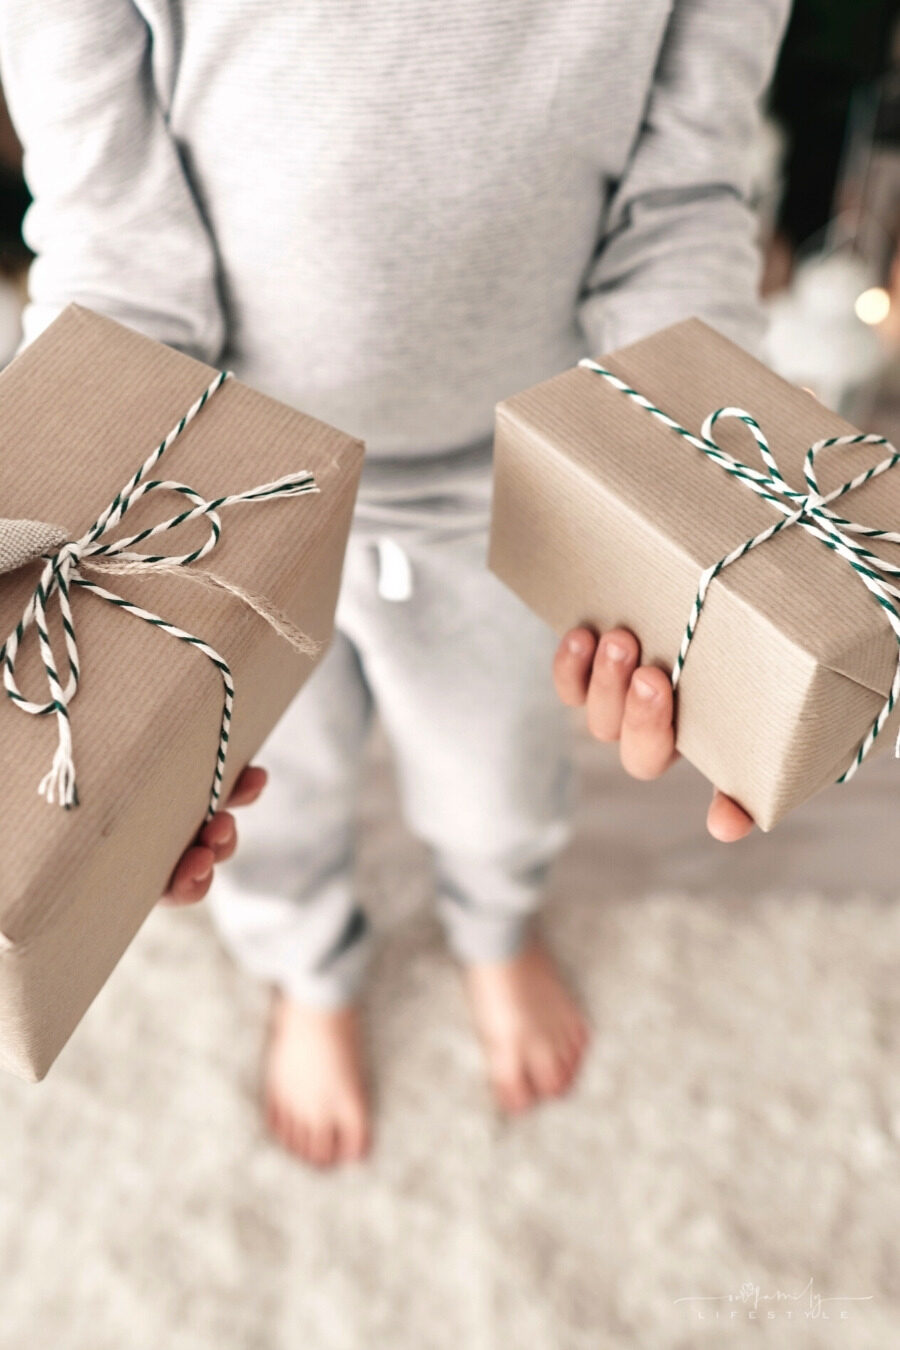 4 Amazing Gift Ideas Your Kids Will Definitely Love